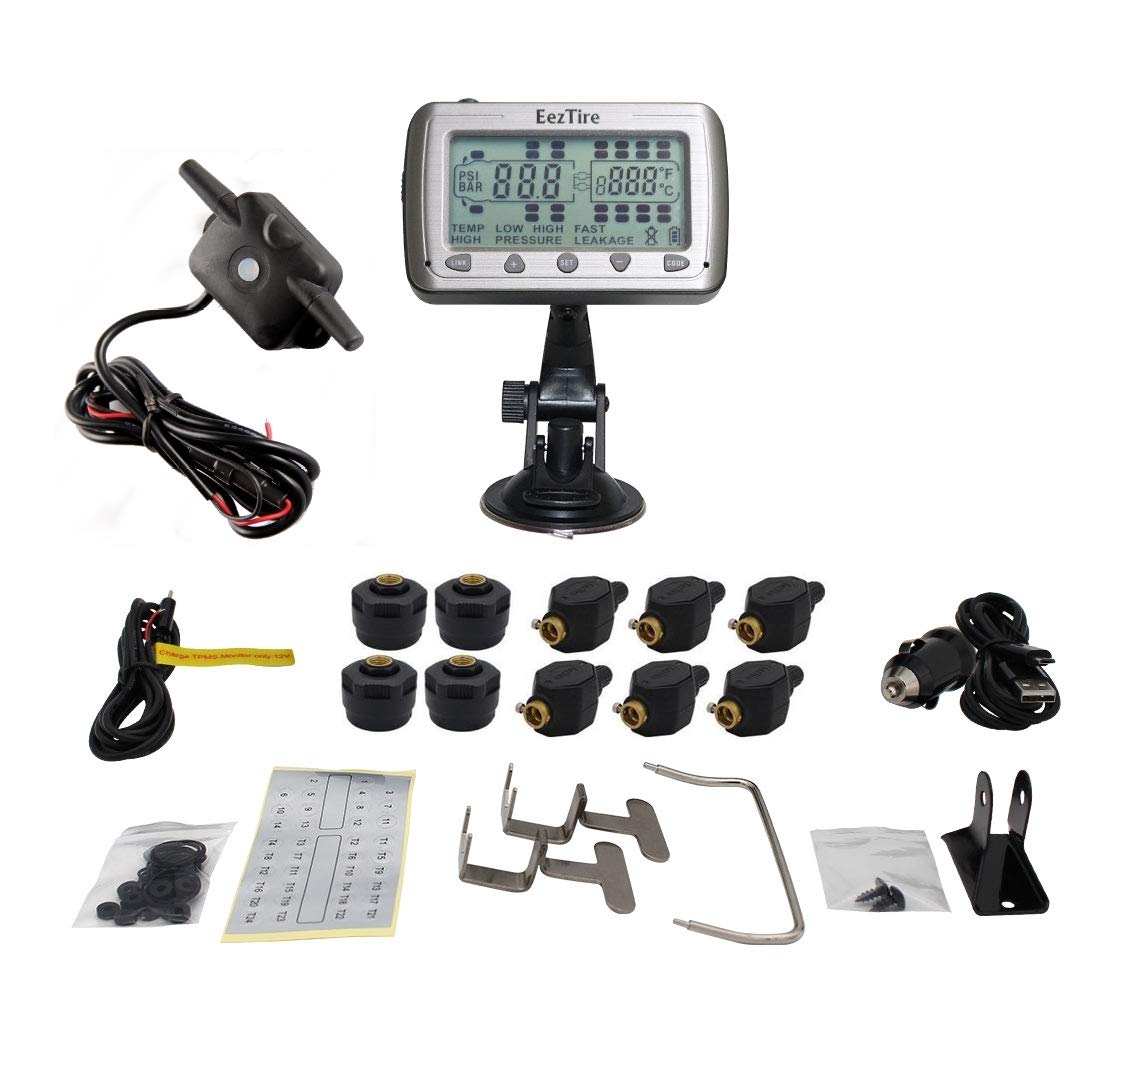 TPMS10Mix 3-Year Warranty incl EEZTire-TPMS Real Time/24x7 Tire Pressure  Monitoring System - 10 Mixed Sensors Automotive Accessories urbytus.com